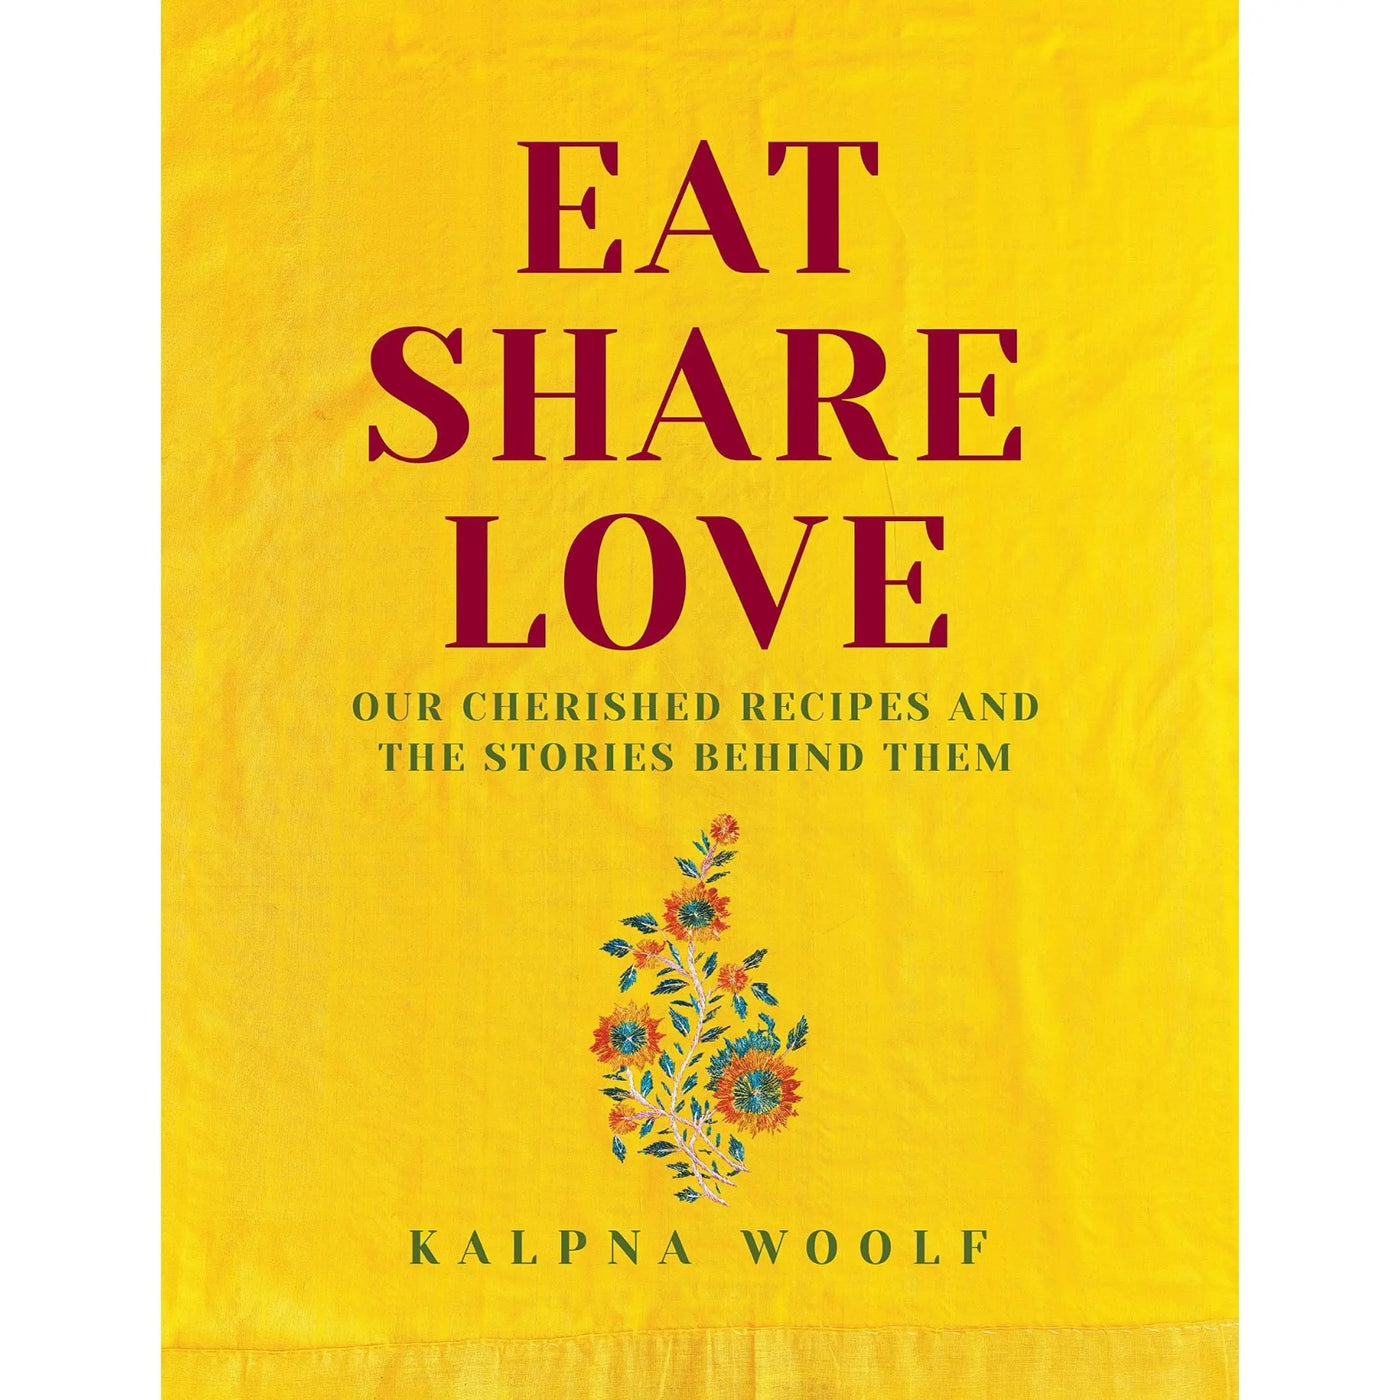 Kalpna Woolf: Eat, Share, Love: Our cherished recipes and the stories behind them - Migration Museum Shop